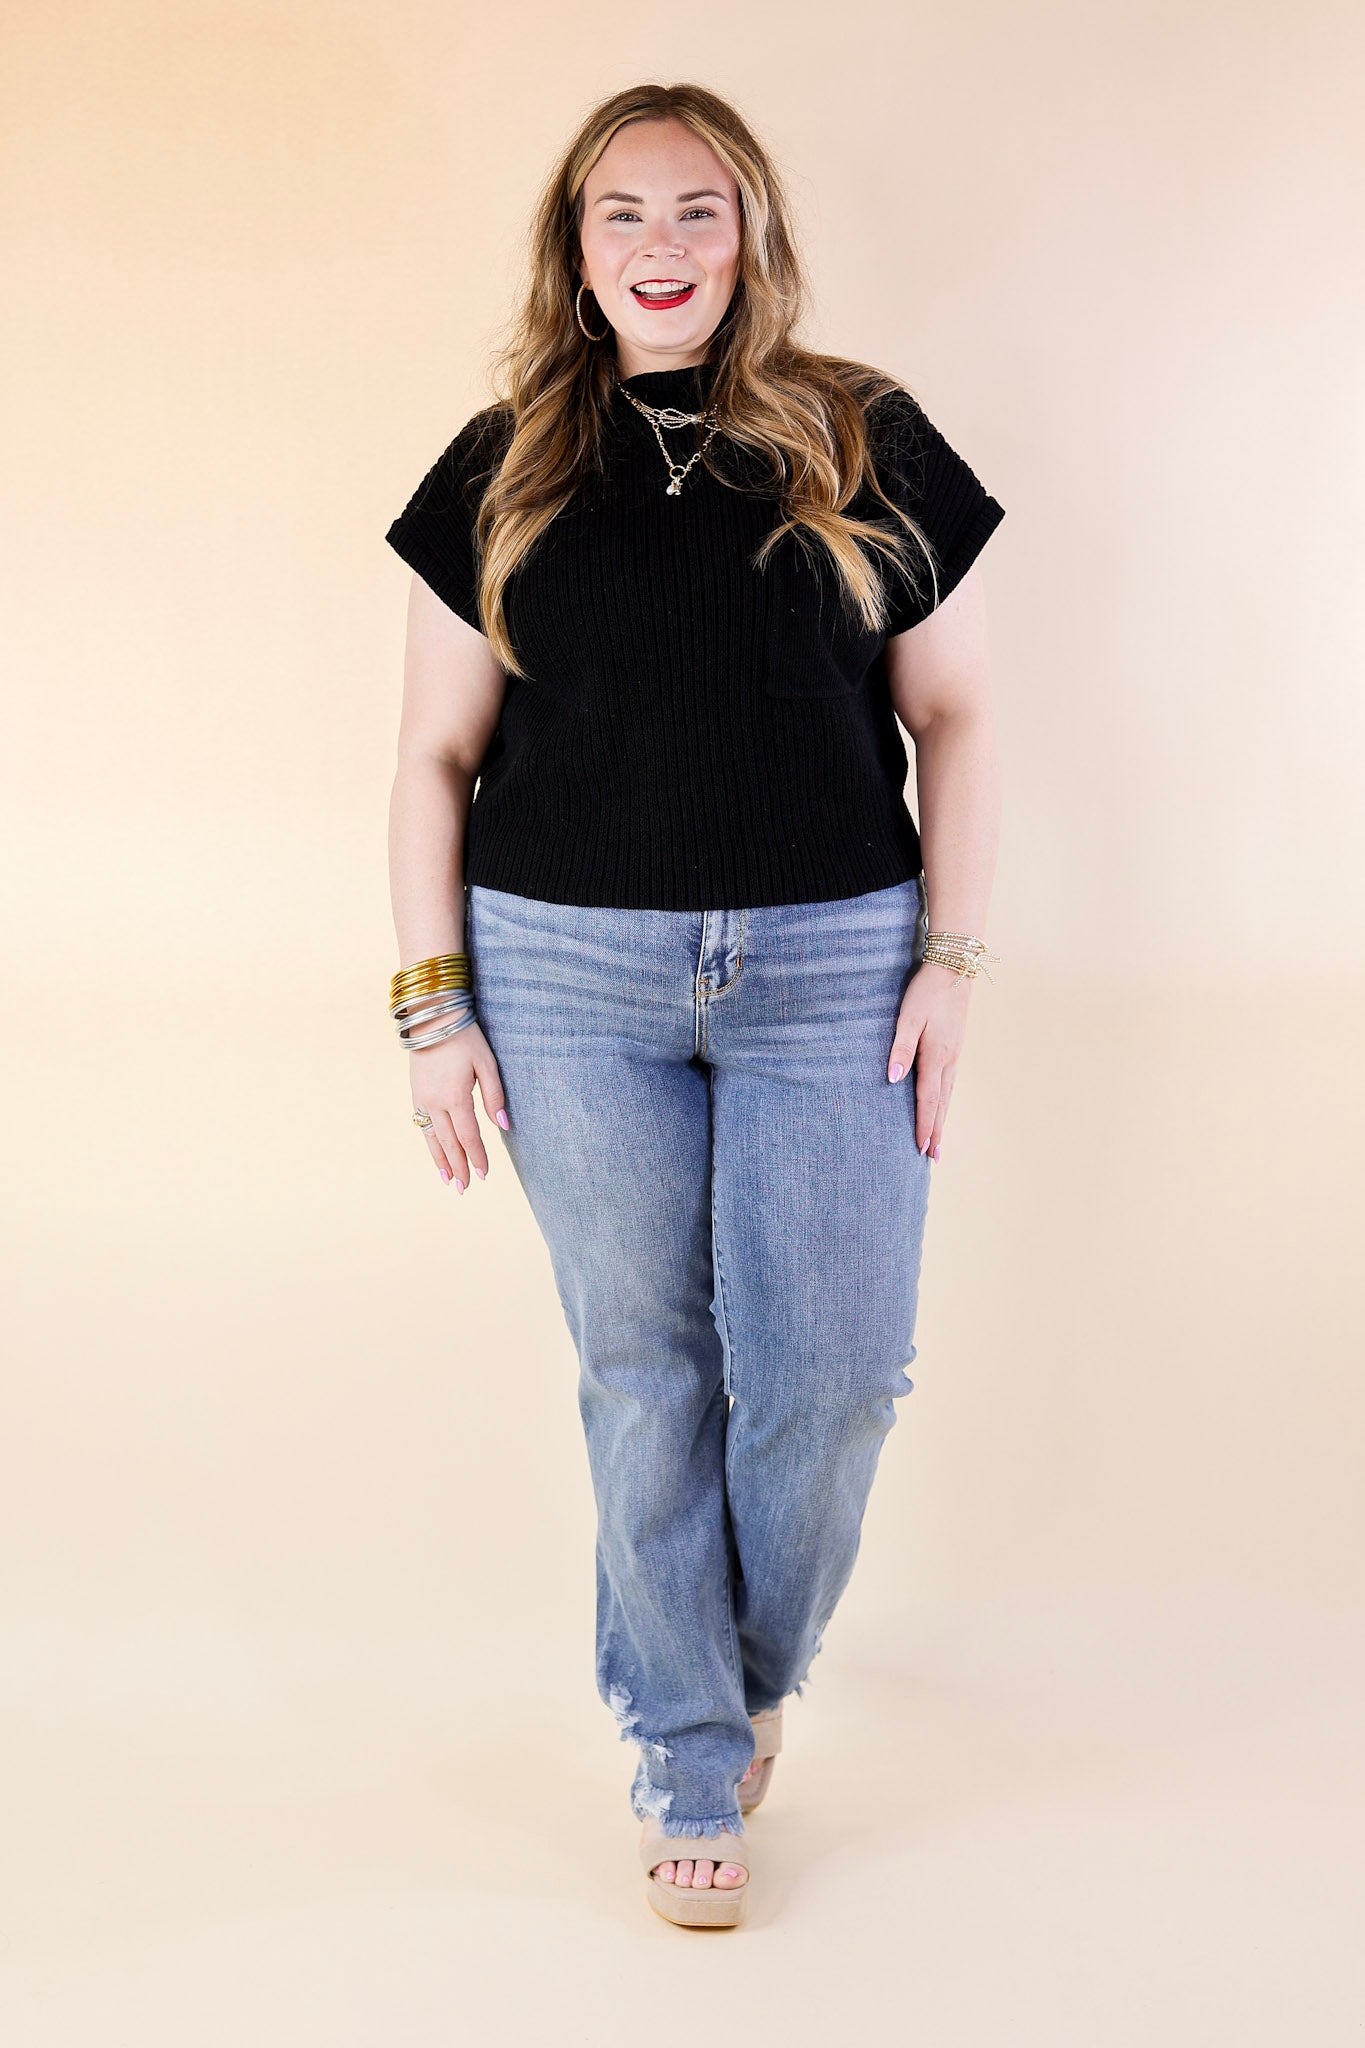 Judy Blue | Weekend Wanderer High Waisted Straight Leg Jean with Destroyed Hem in Medium Wash - Giddy Up Glamour Boutique